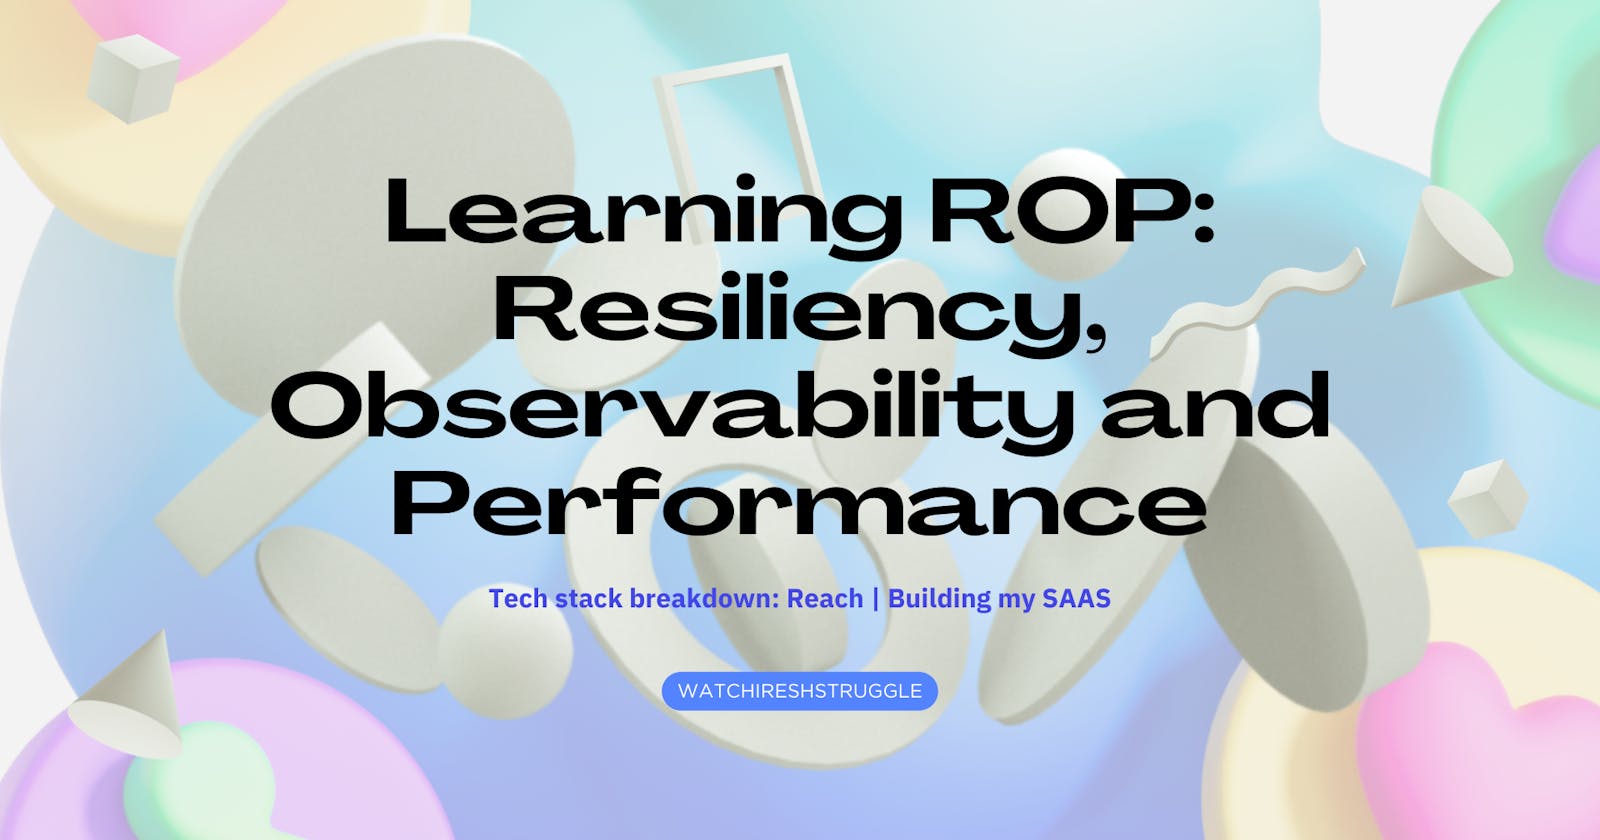 Learning ROP: Resiliency, Observability and Performance